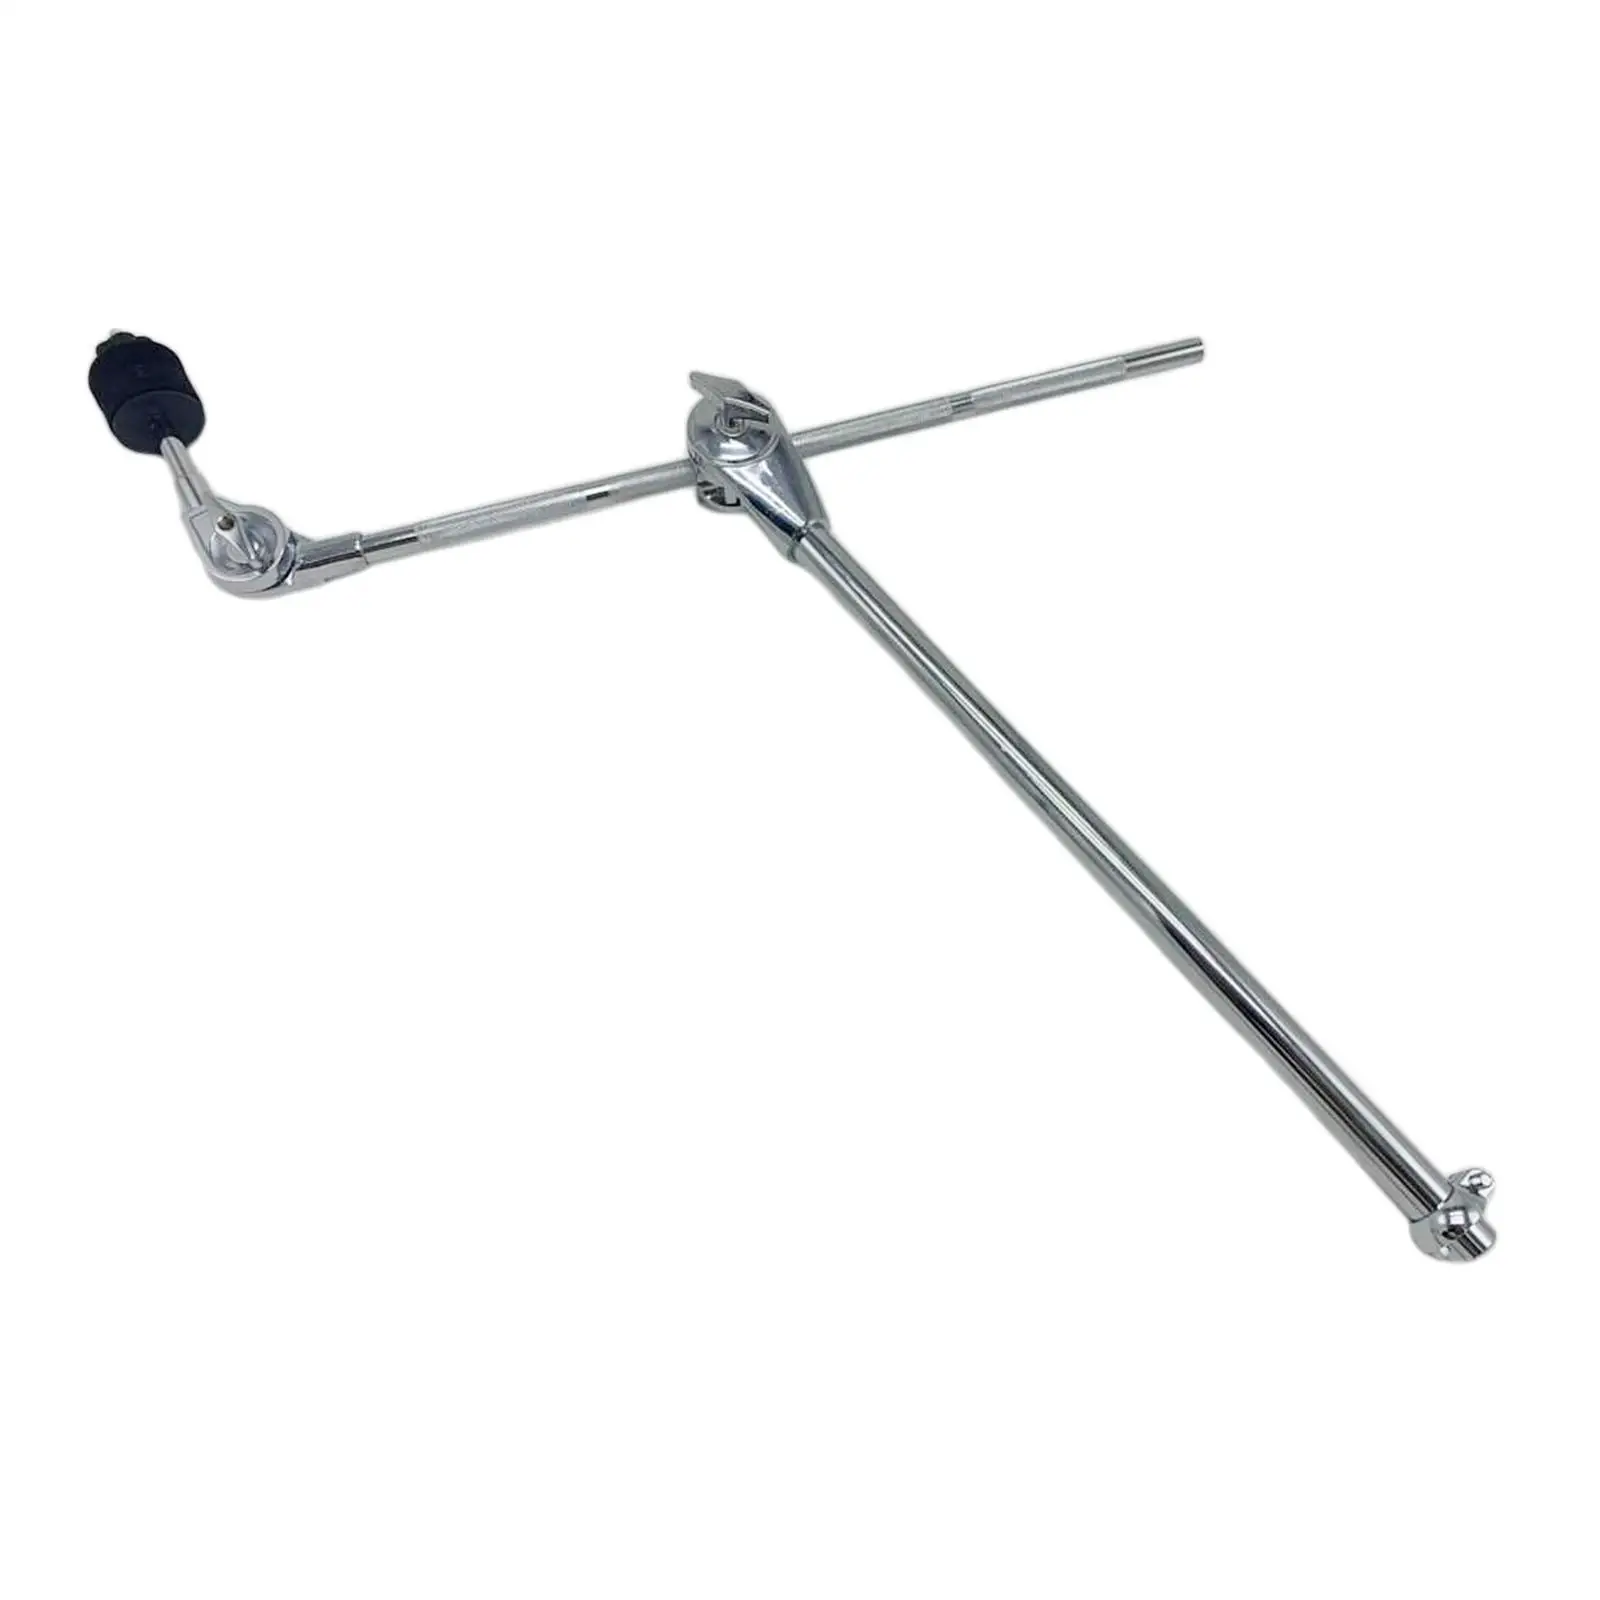 Cymbal Boom Holder Dual Locking Drum Parts Adjustable Percussion Accessories Sturdy Cymbal Stand Extension Clamp Mount Hardware